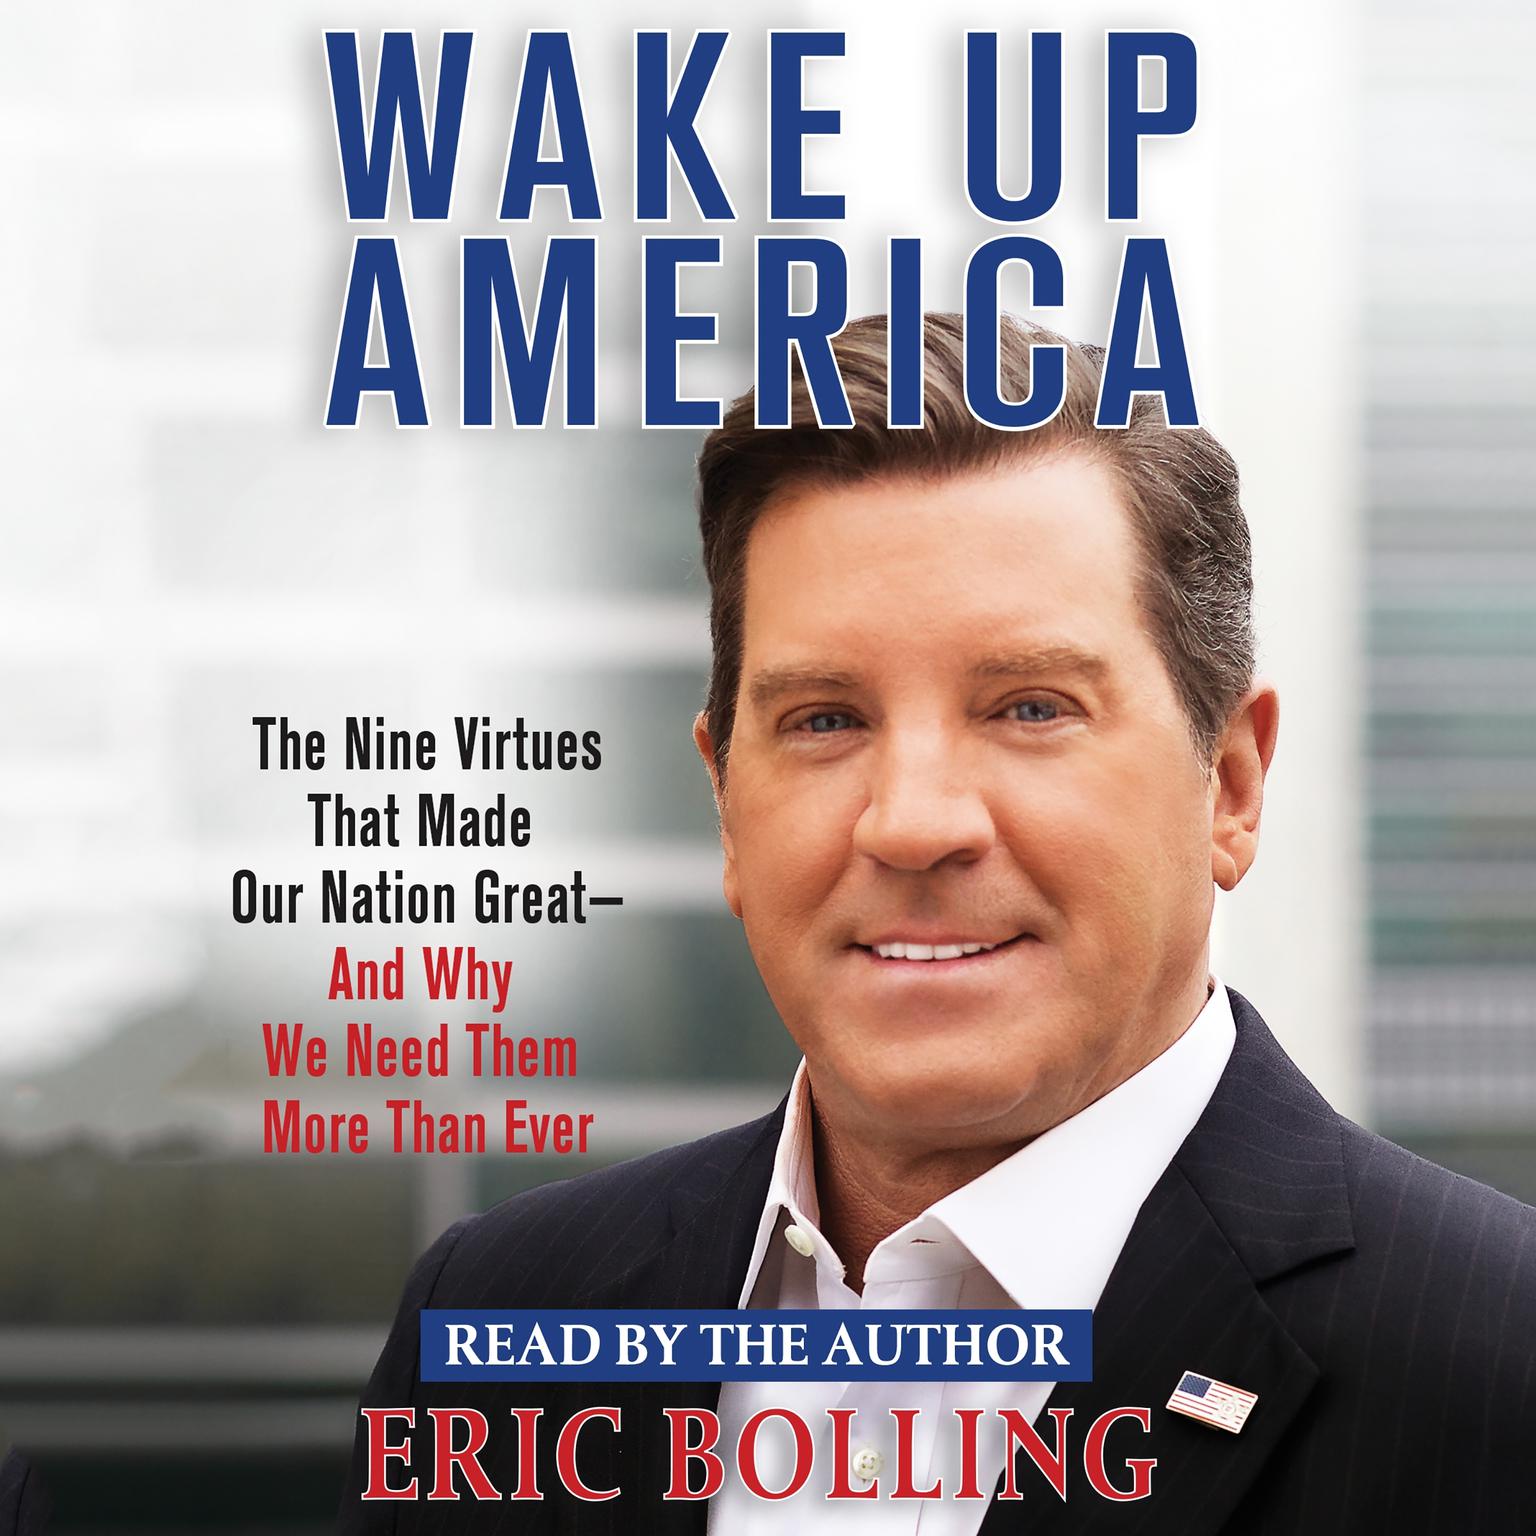 Wake Up America: The Nine Virtues That Made Our Nation Great--and Why We Need Them More Than Ever Audiobook, by Eric Bolling